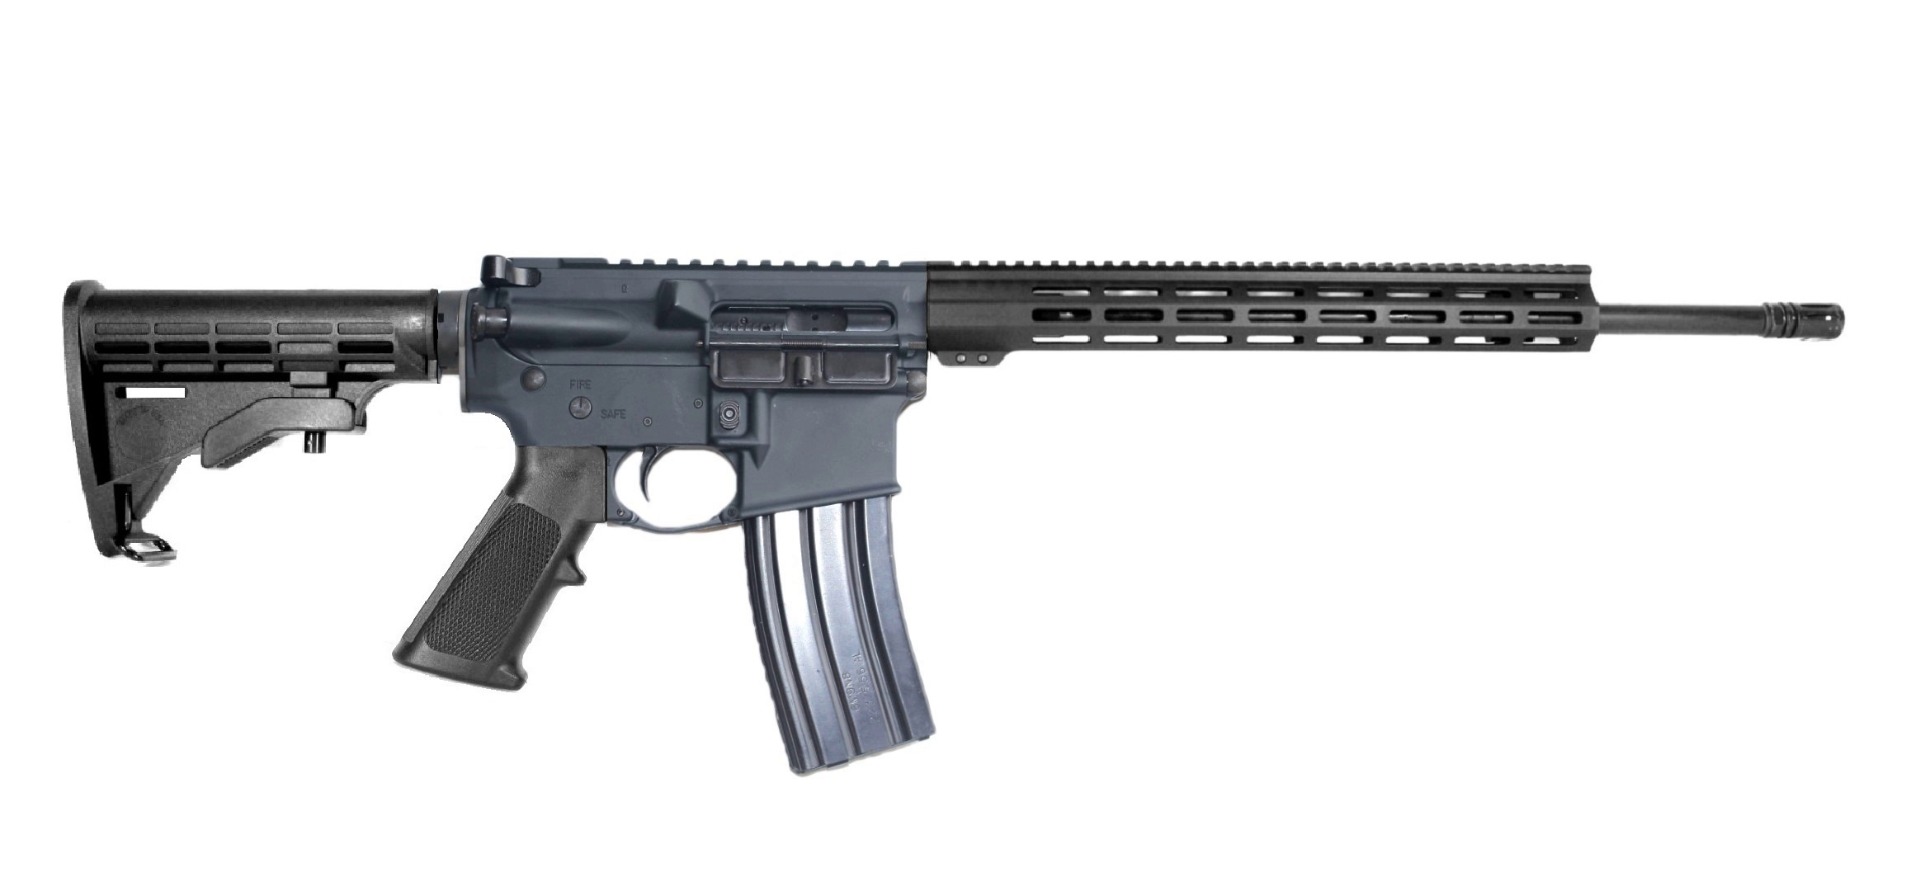 Shop 20 inch 224 Valkyrie AR-15 Rifles - In Stock!